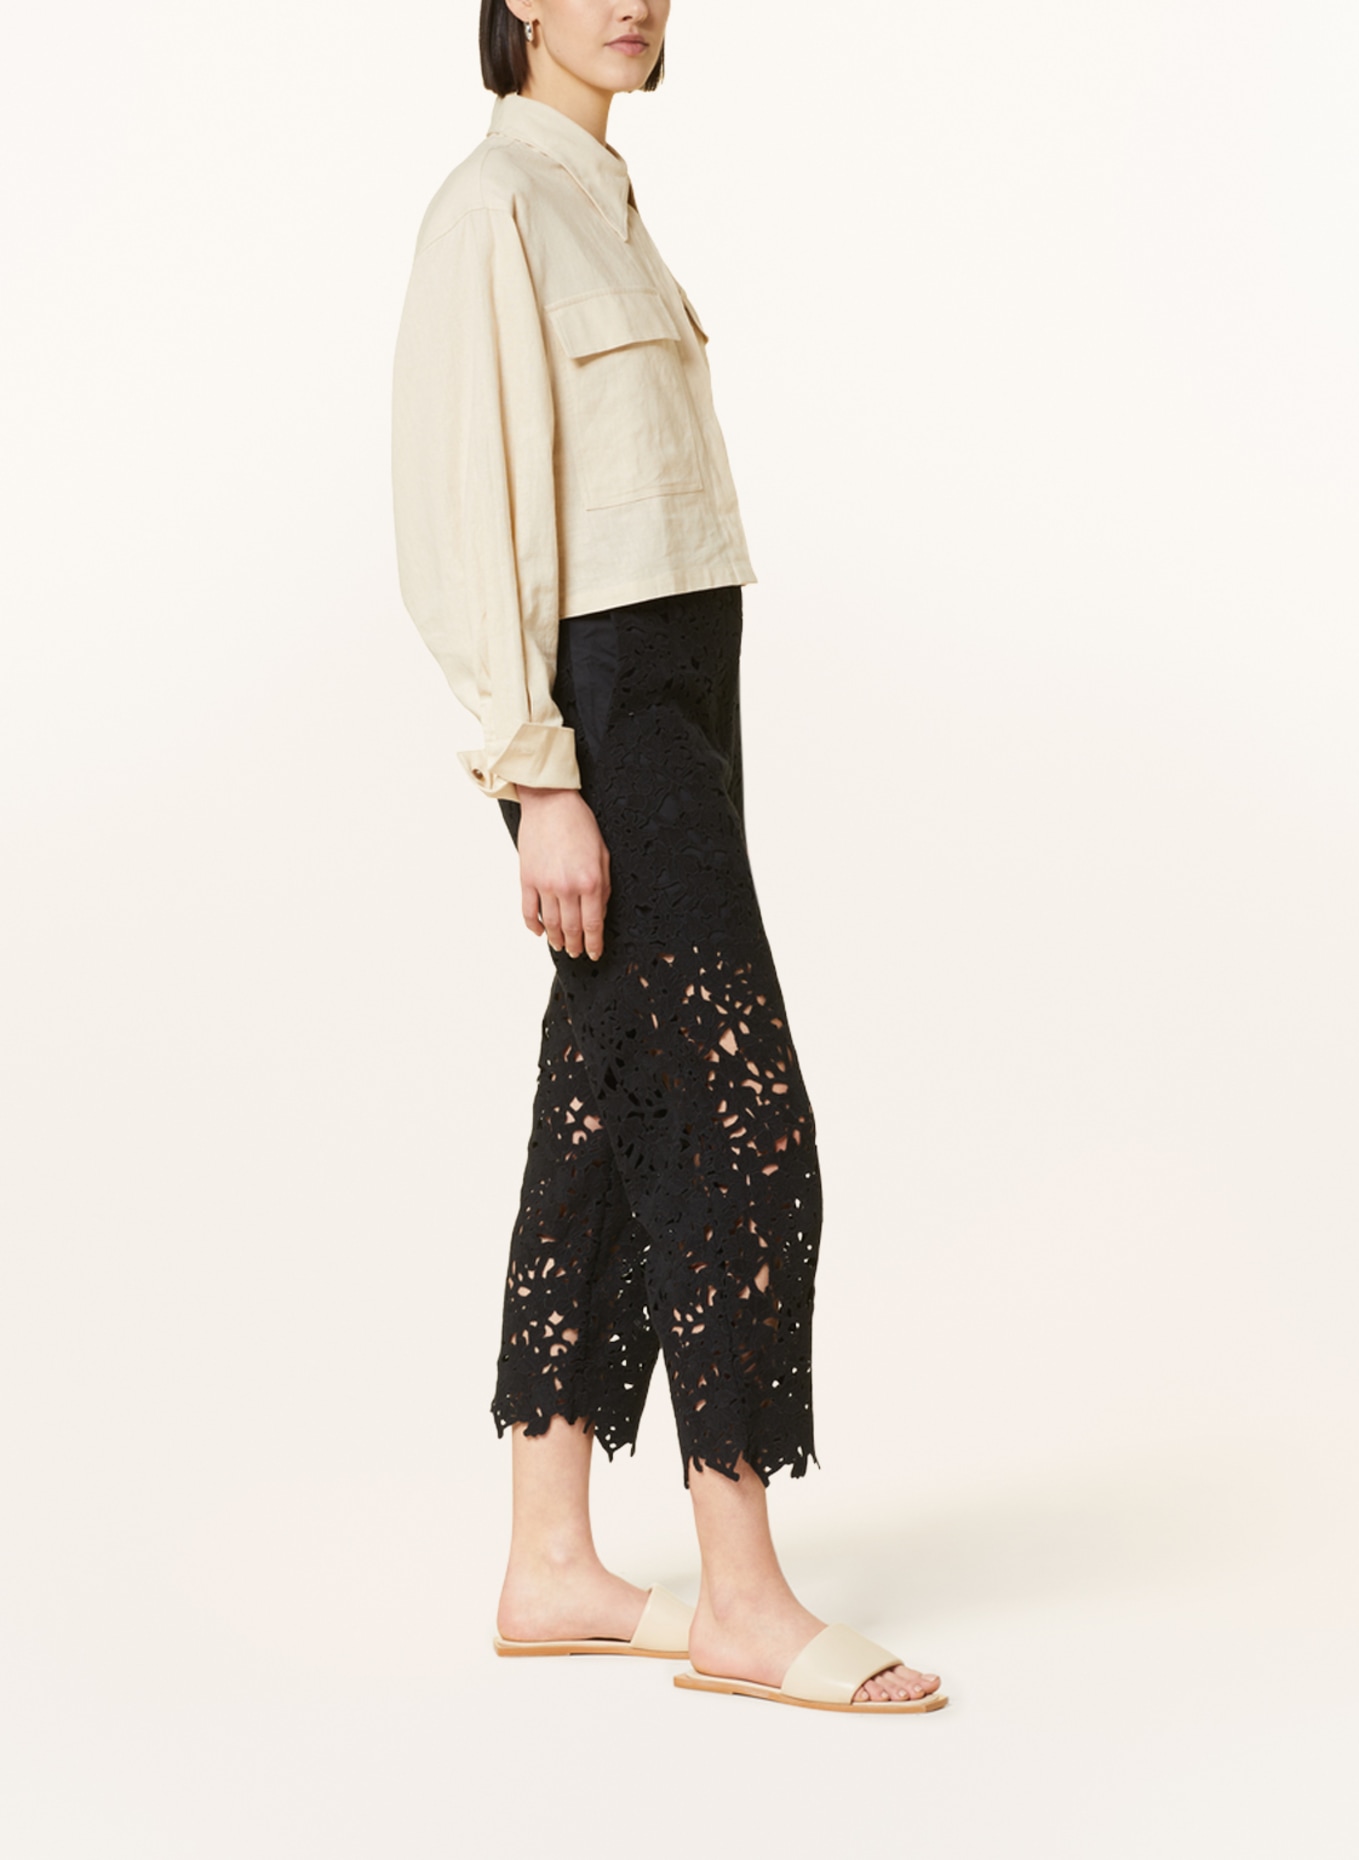 COS 7/8 trousers made of crochet lace, Color: BLACK (Image 4)